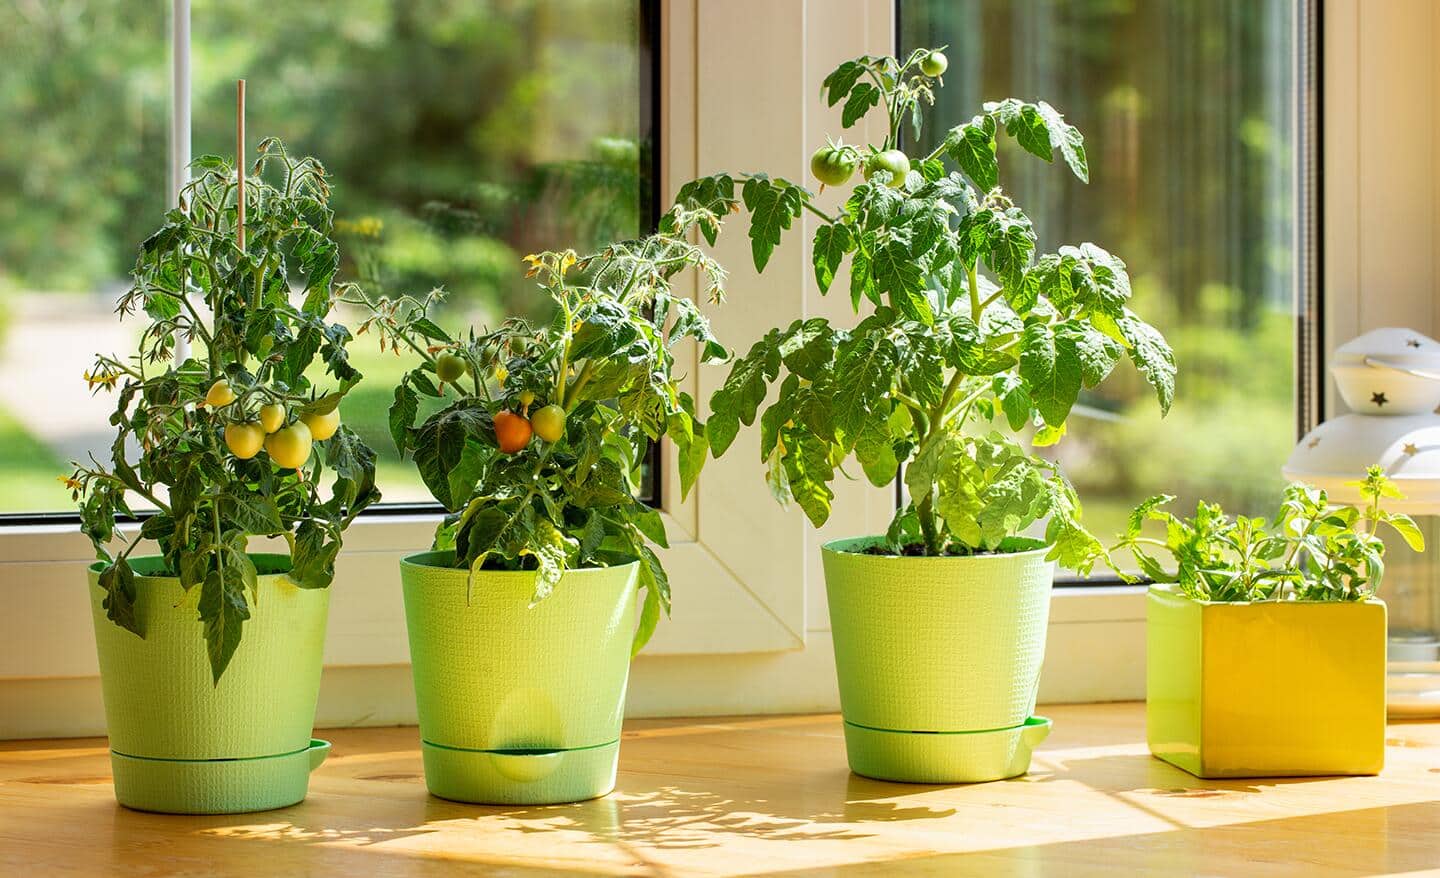 Vegetables growing in containers in a window